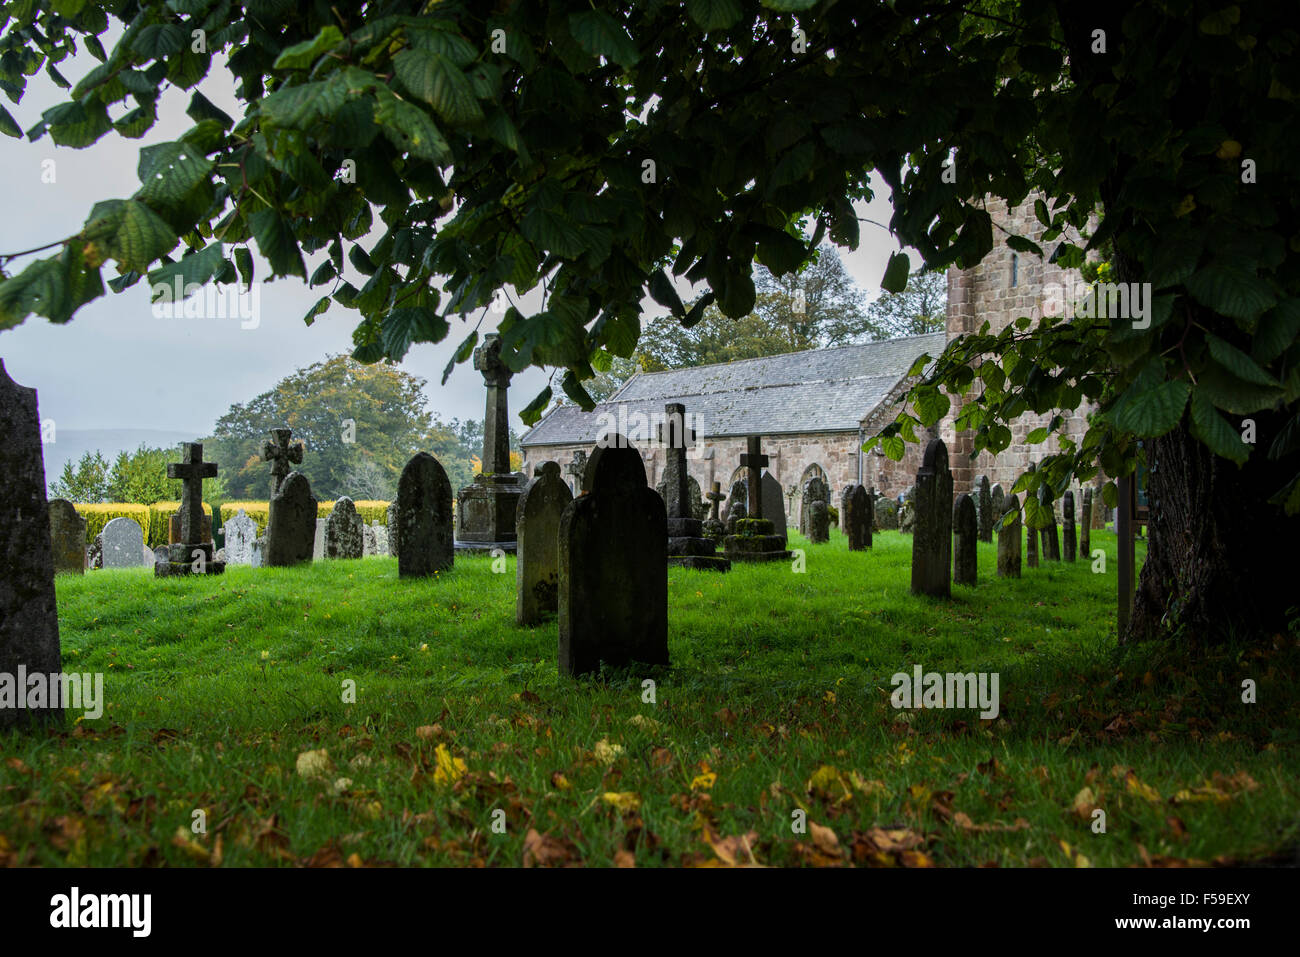 A rainy October day in Chagford near Dartmoor in Devon. The church of St Michael the Archangel and graveyard Stock Photo